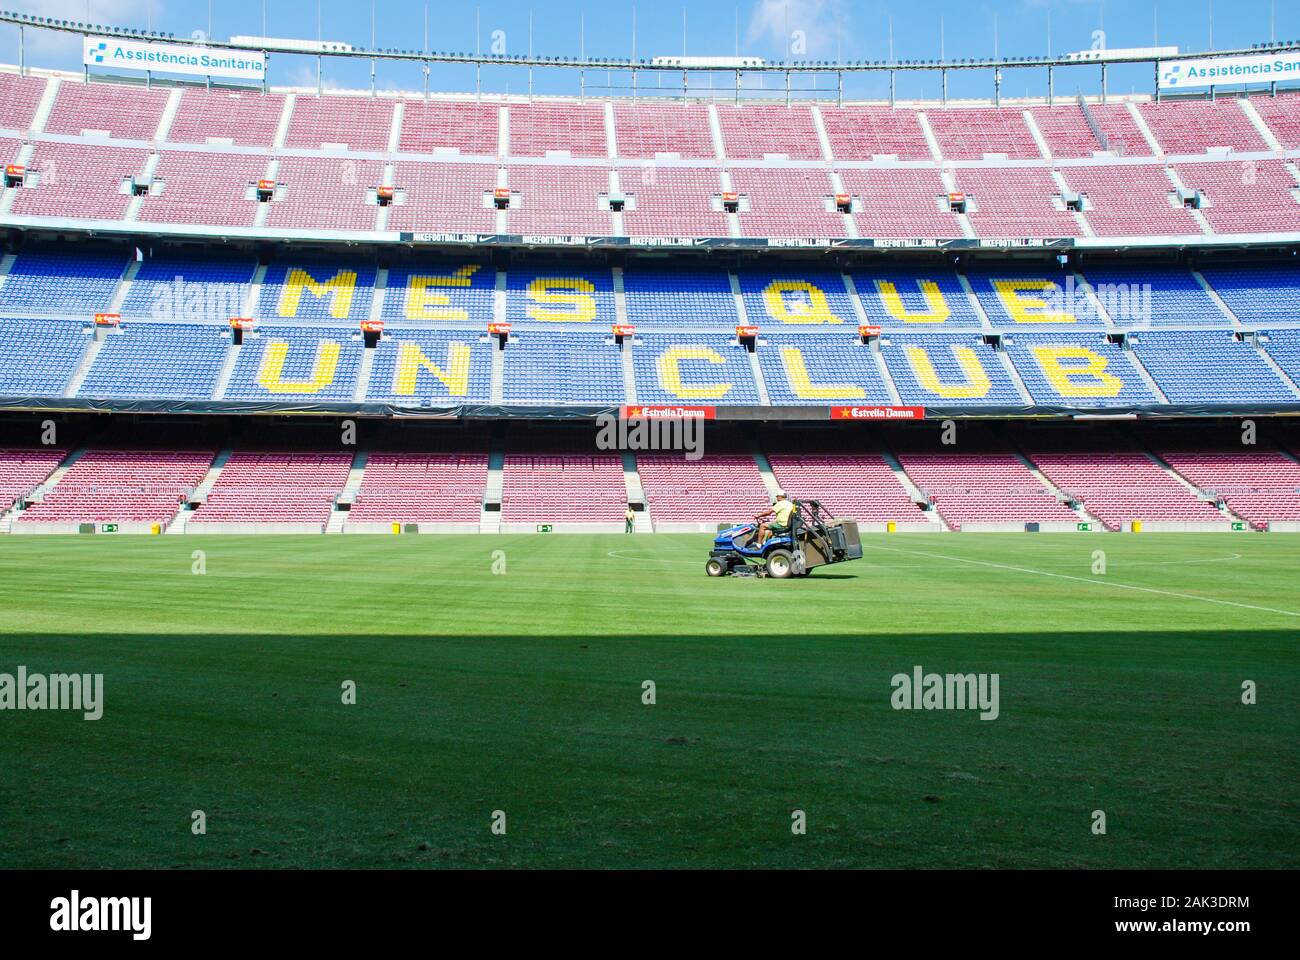 SPAIN, BARCELONA – JULY , 2013: A view at the home stadium of FC Barcelona, Camp Nou stadium and lawn mower tractor. Stock Photo